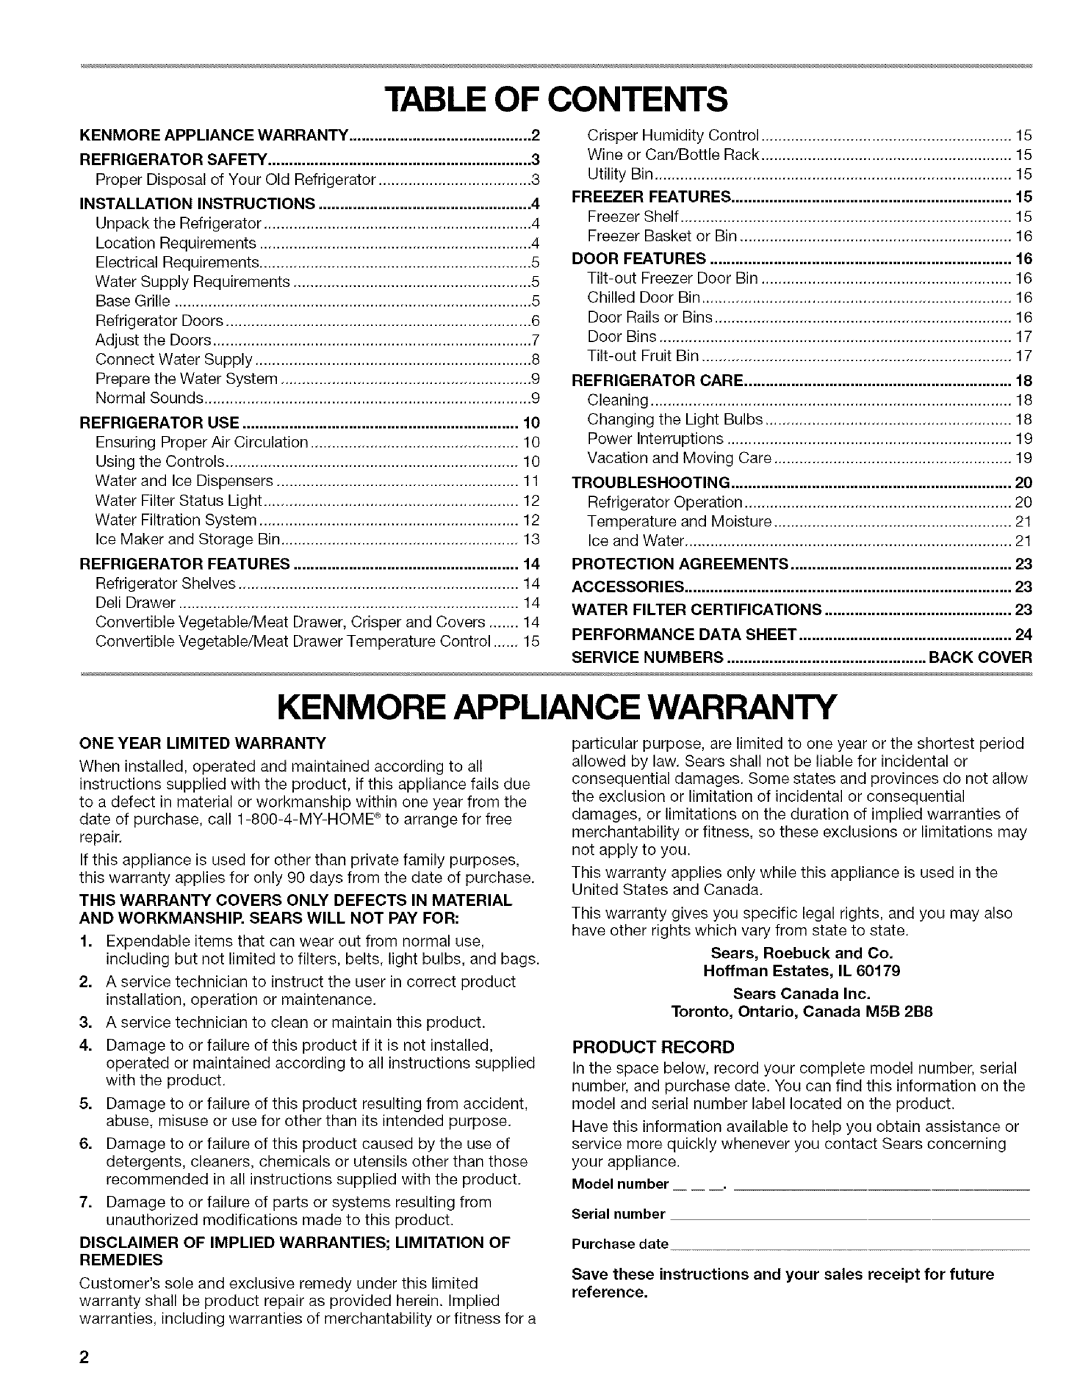 Kenmore WI0151336A manual Table Of Contents, Kenmore Appliance Warranty, Refrigerator, Features, One Year Limited Warranty 